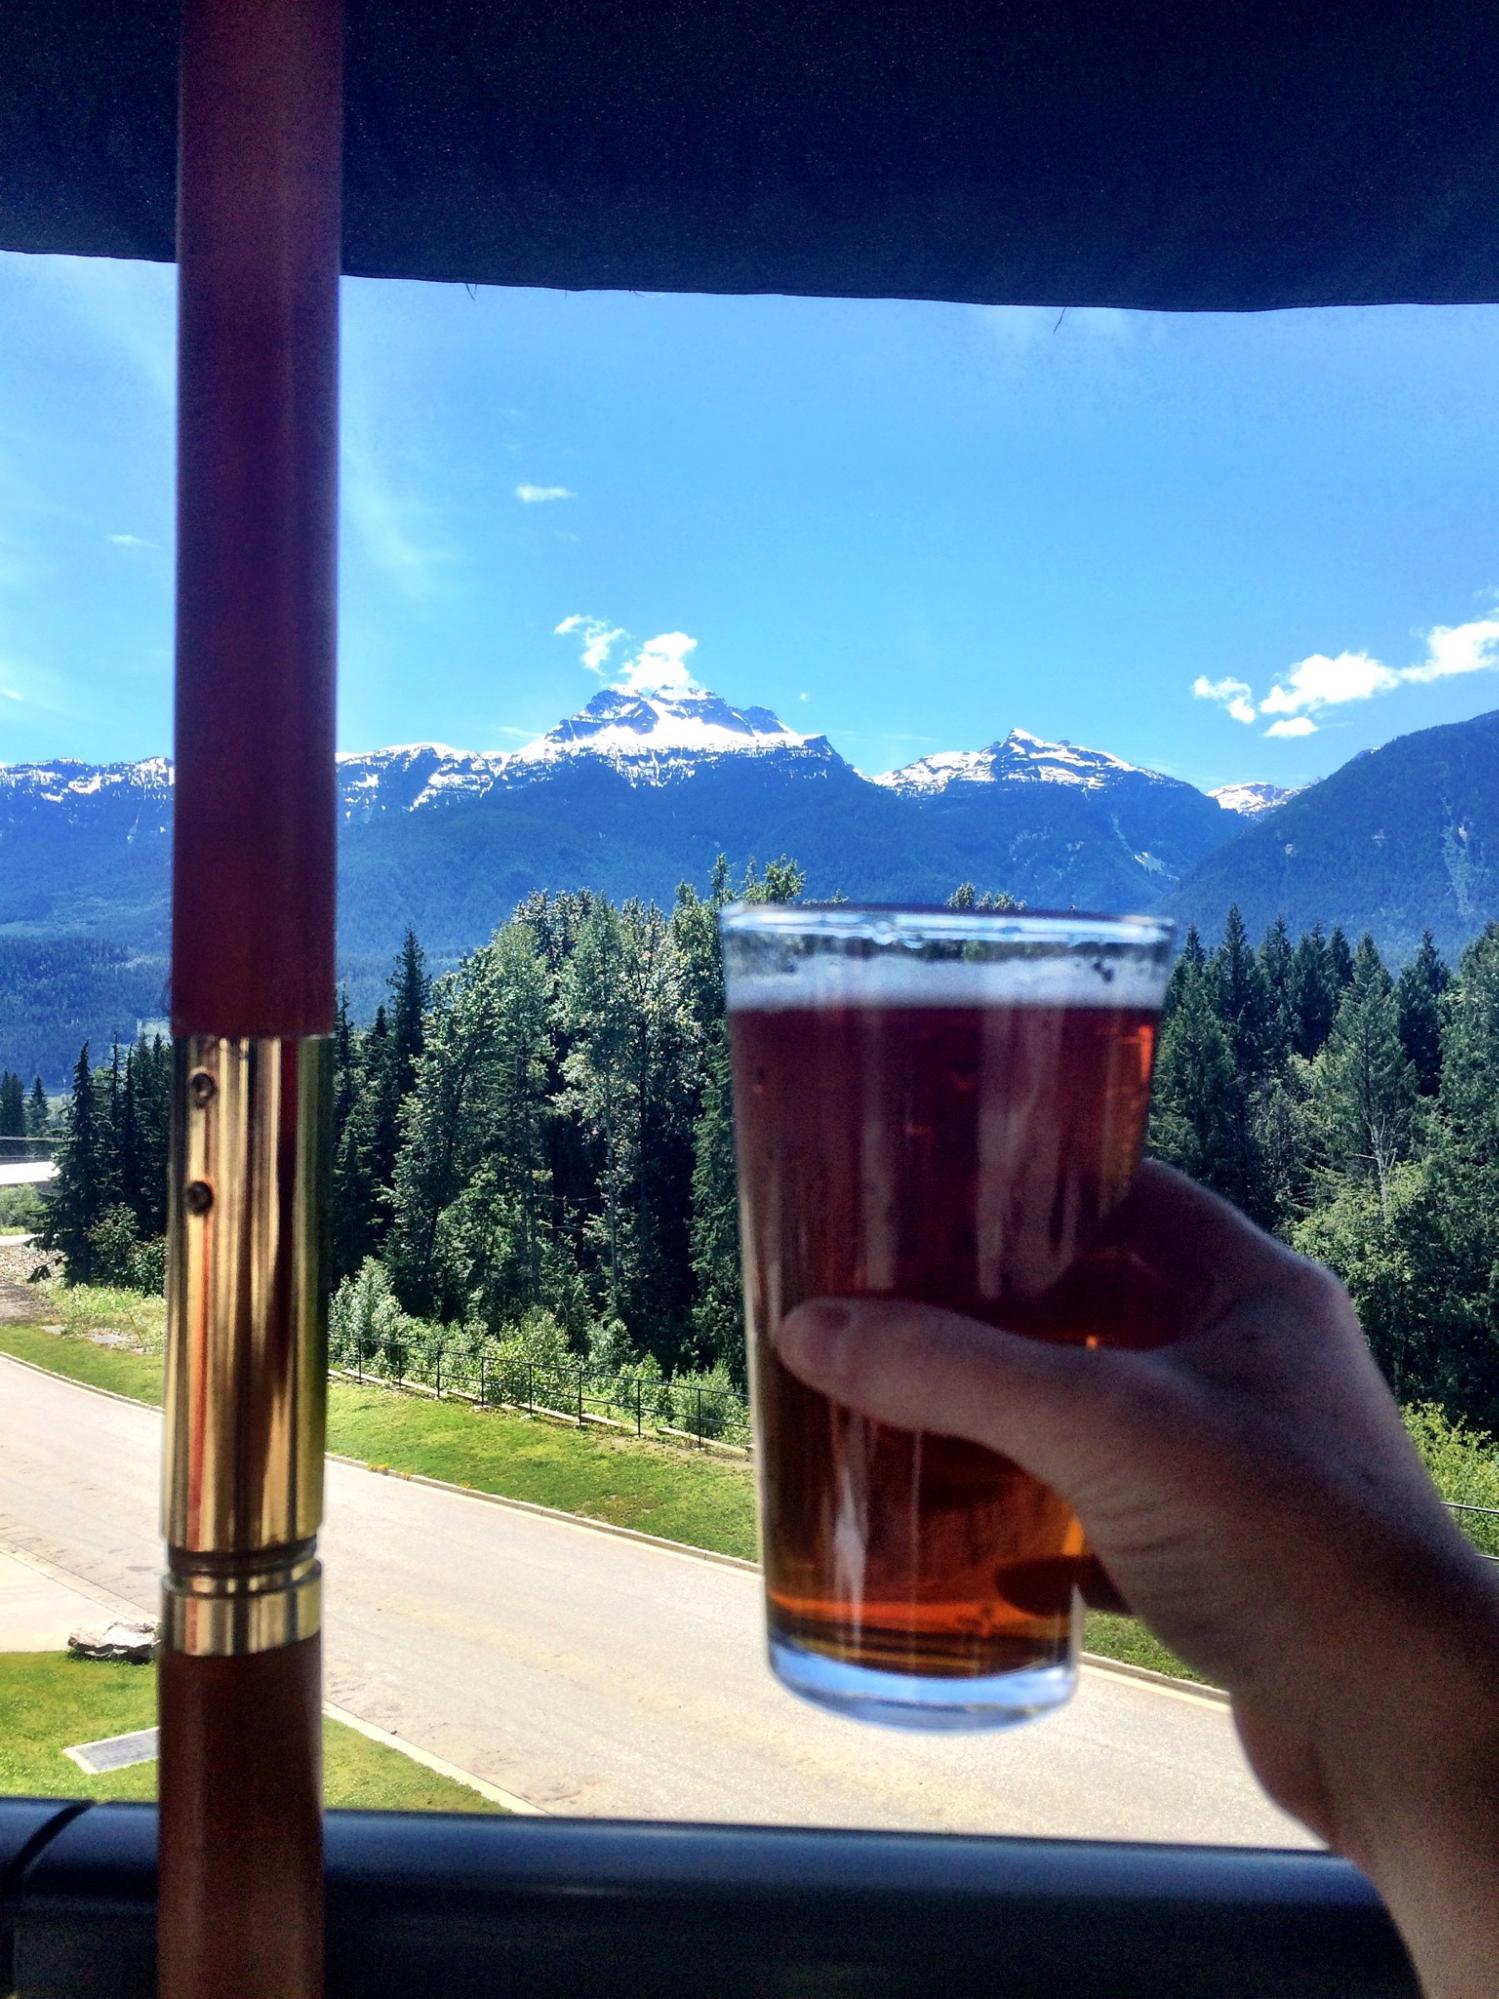 A hand holds up a full pint glass in front of a mountainous landscape.